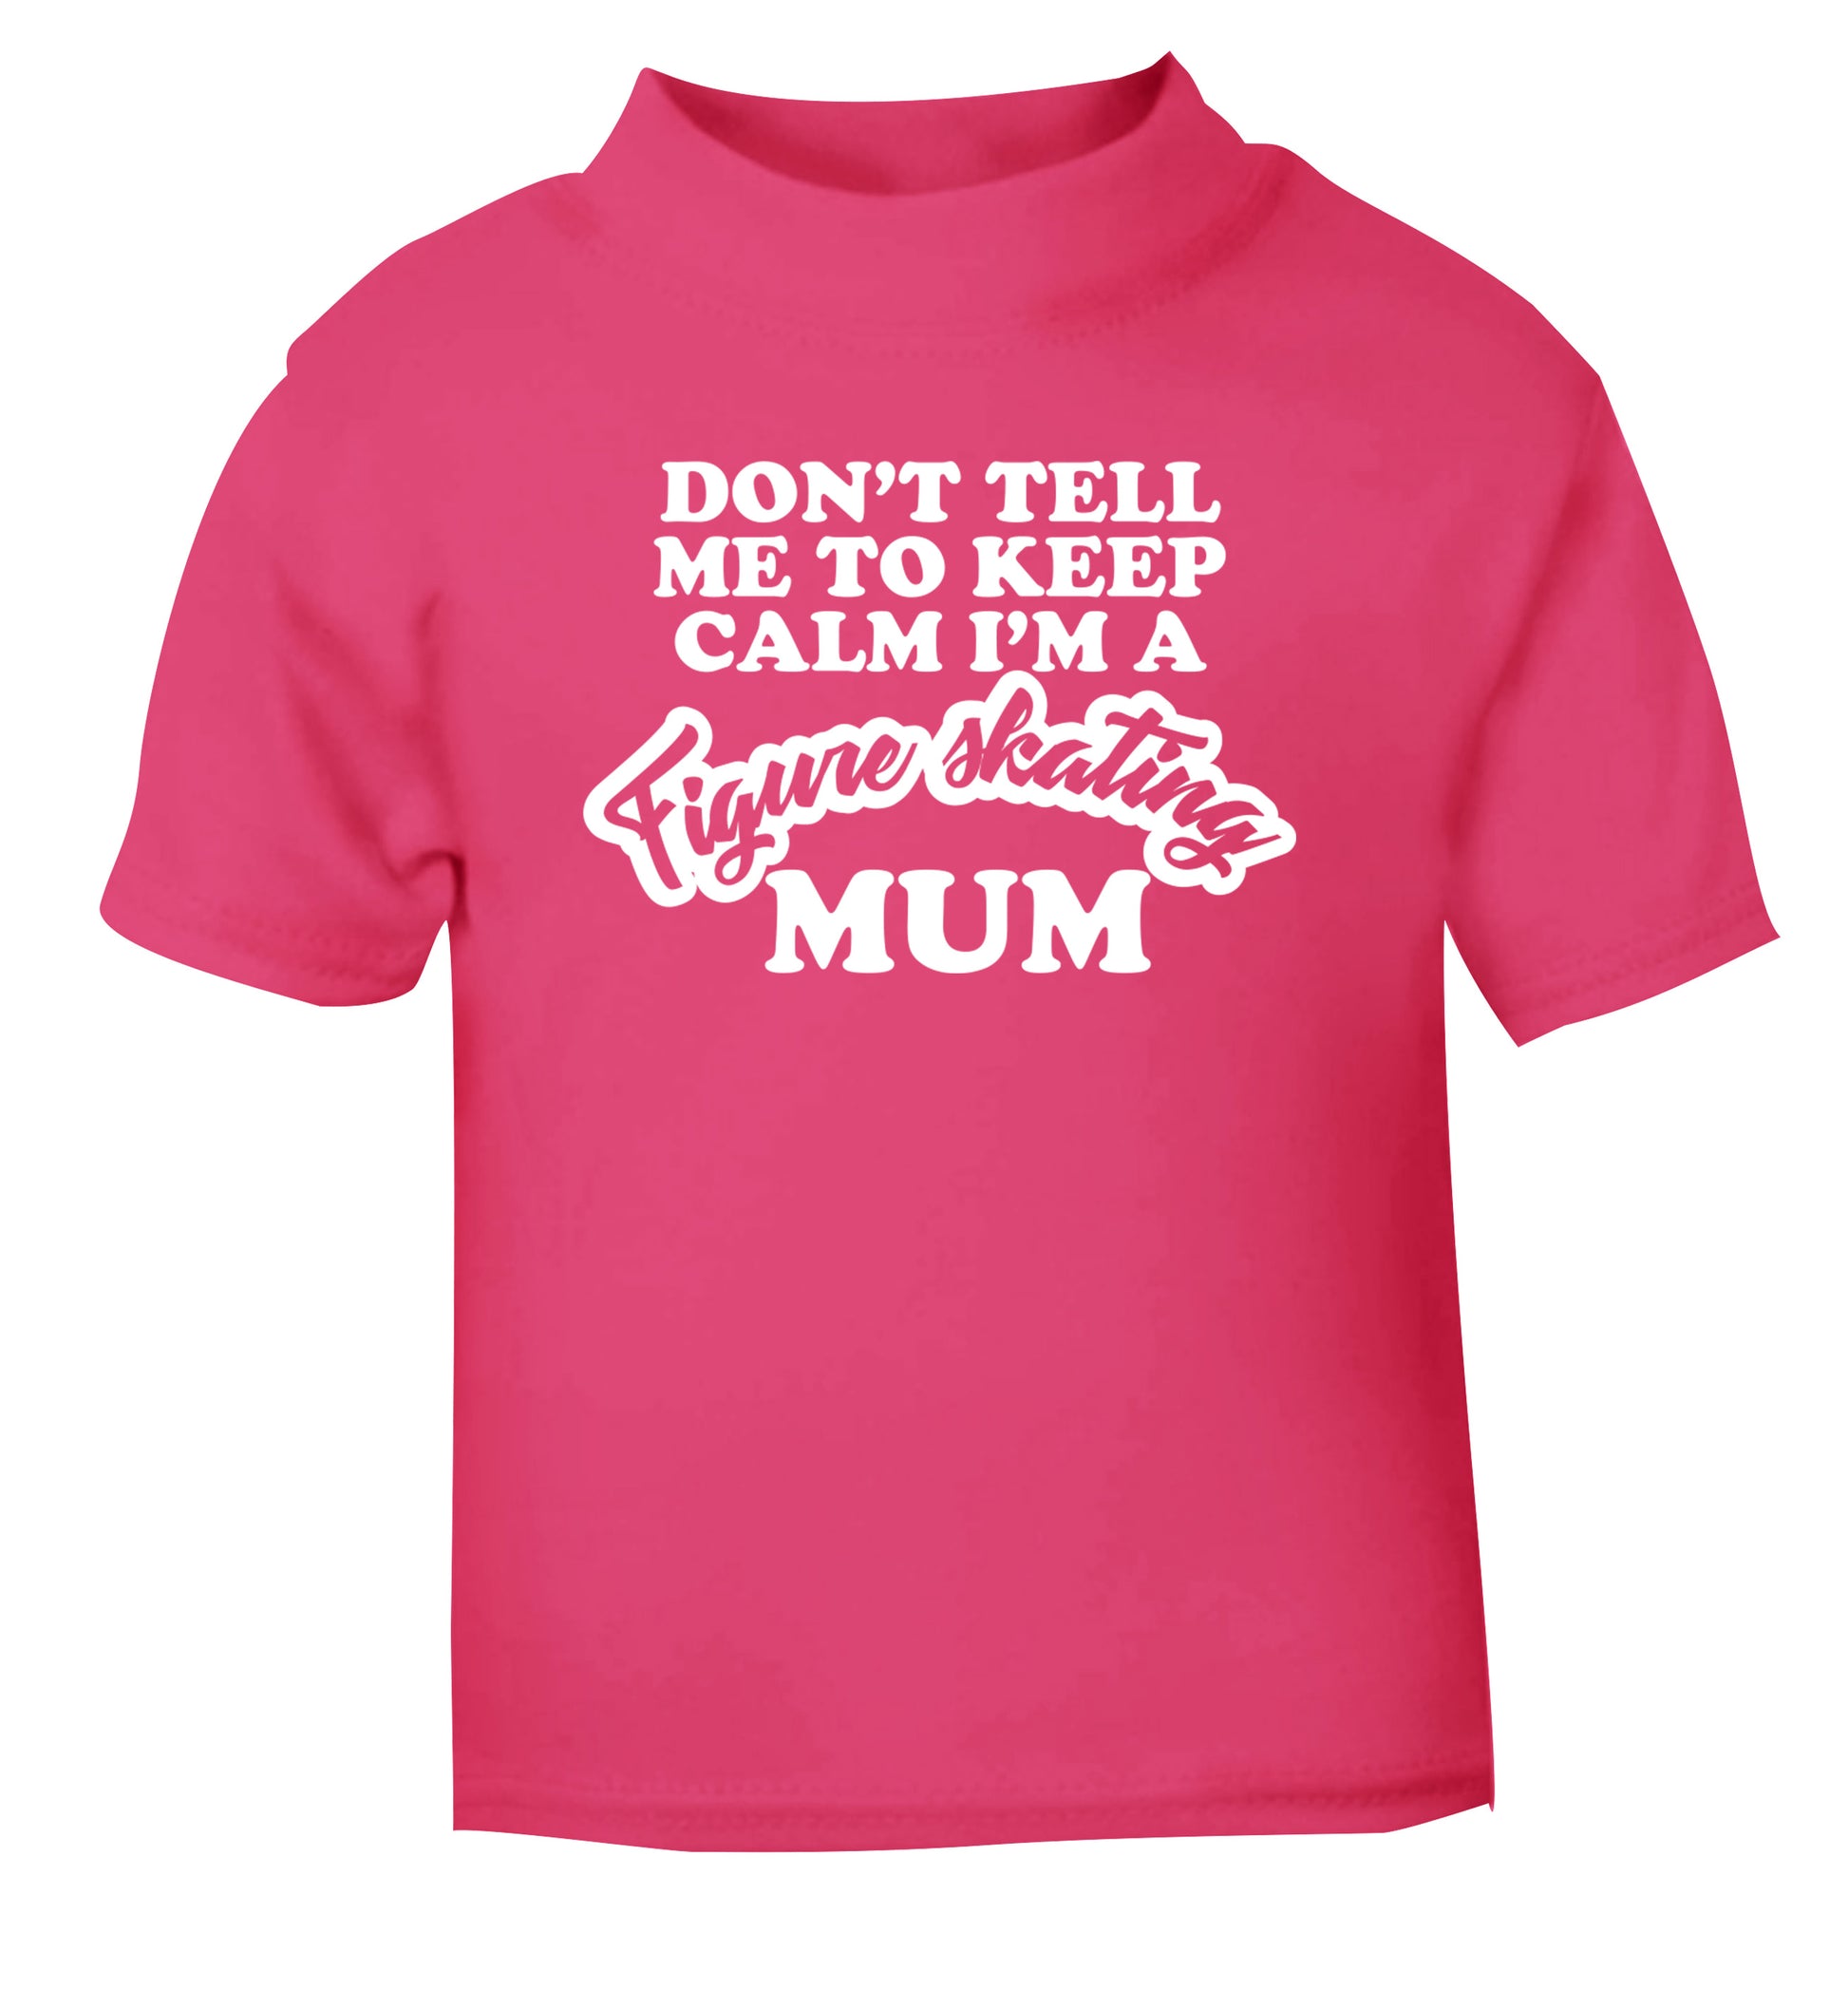 Don't tell me to keep calm I'm a figure skating mum pink Baby Toddler Tshirt 2 Years